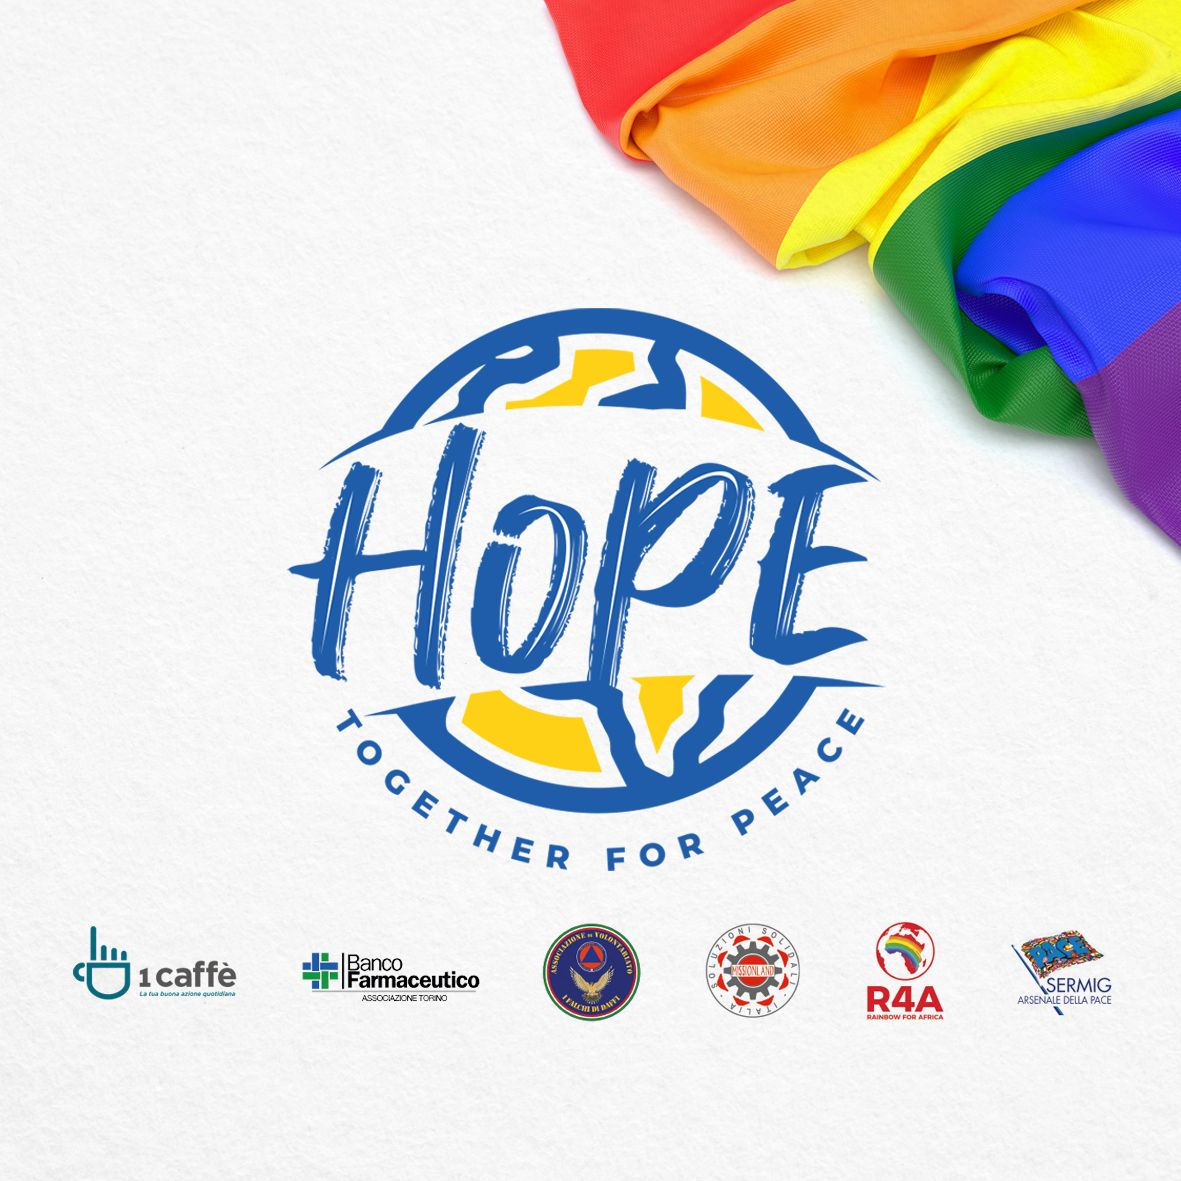 HOPE - Together for Peace